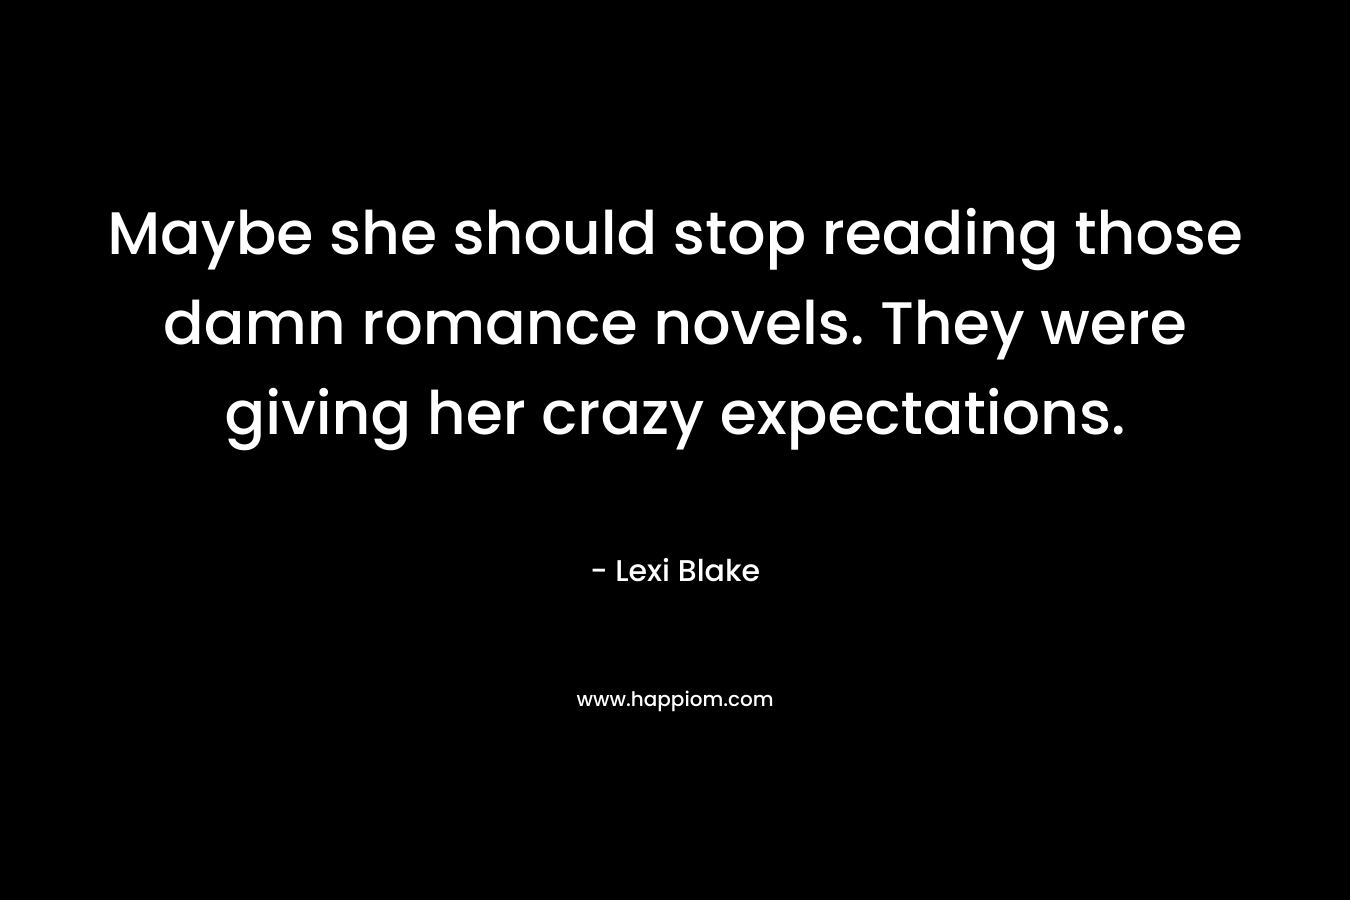 Maybe she should stop reading those damn romance novels. They were giving her crazy expectations. – Lexi Blake